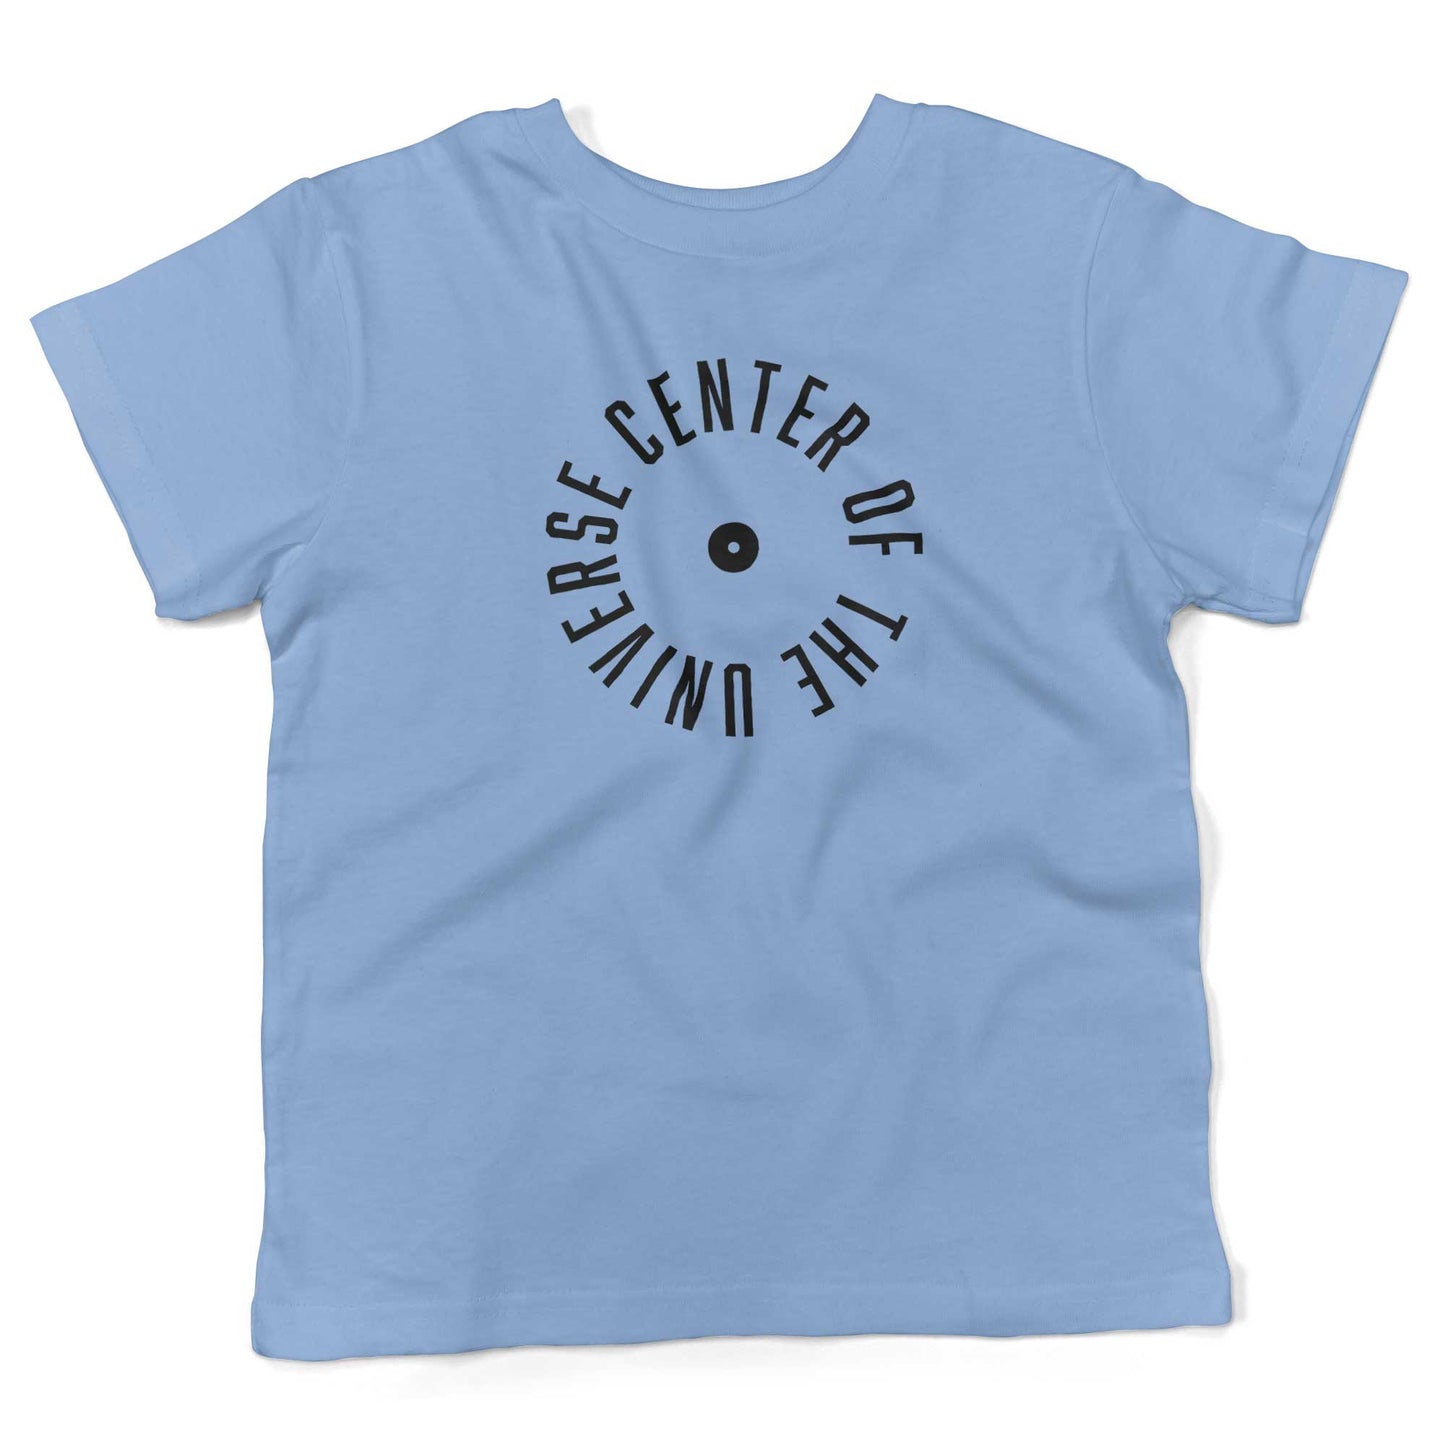 Center Of The Universe Toddler Shirt-Organic Baby Blue-2T